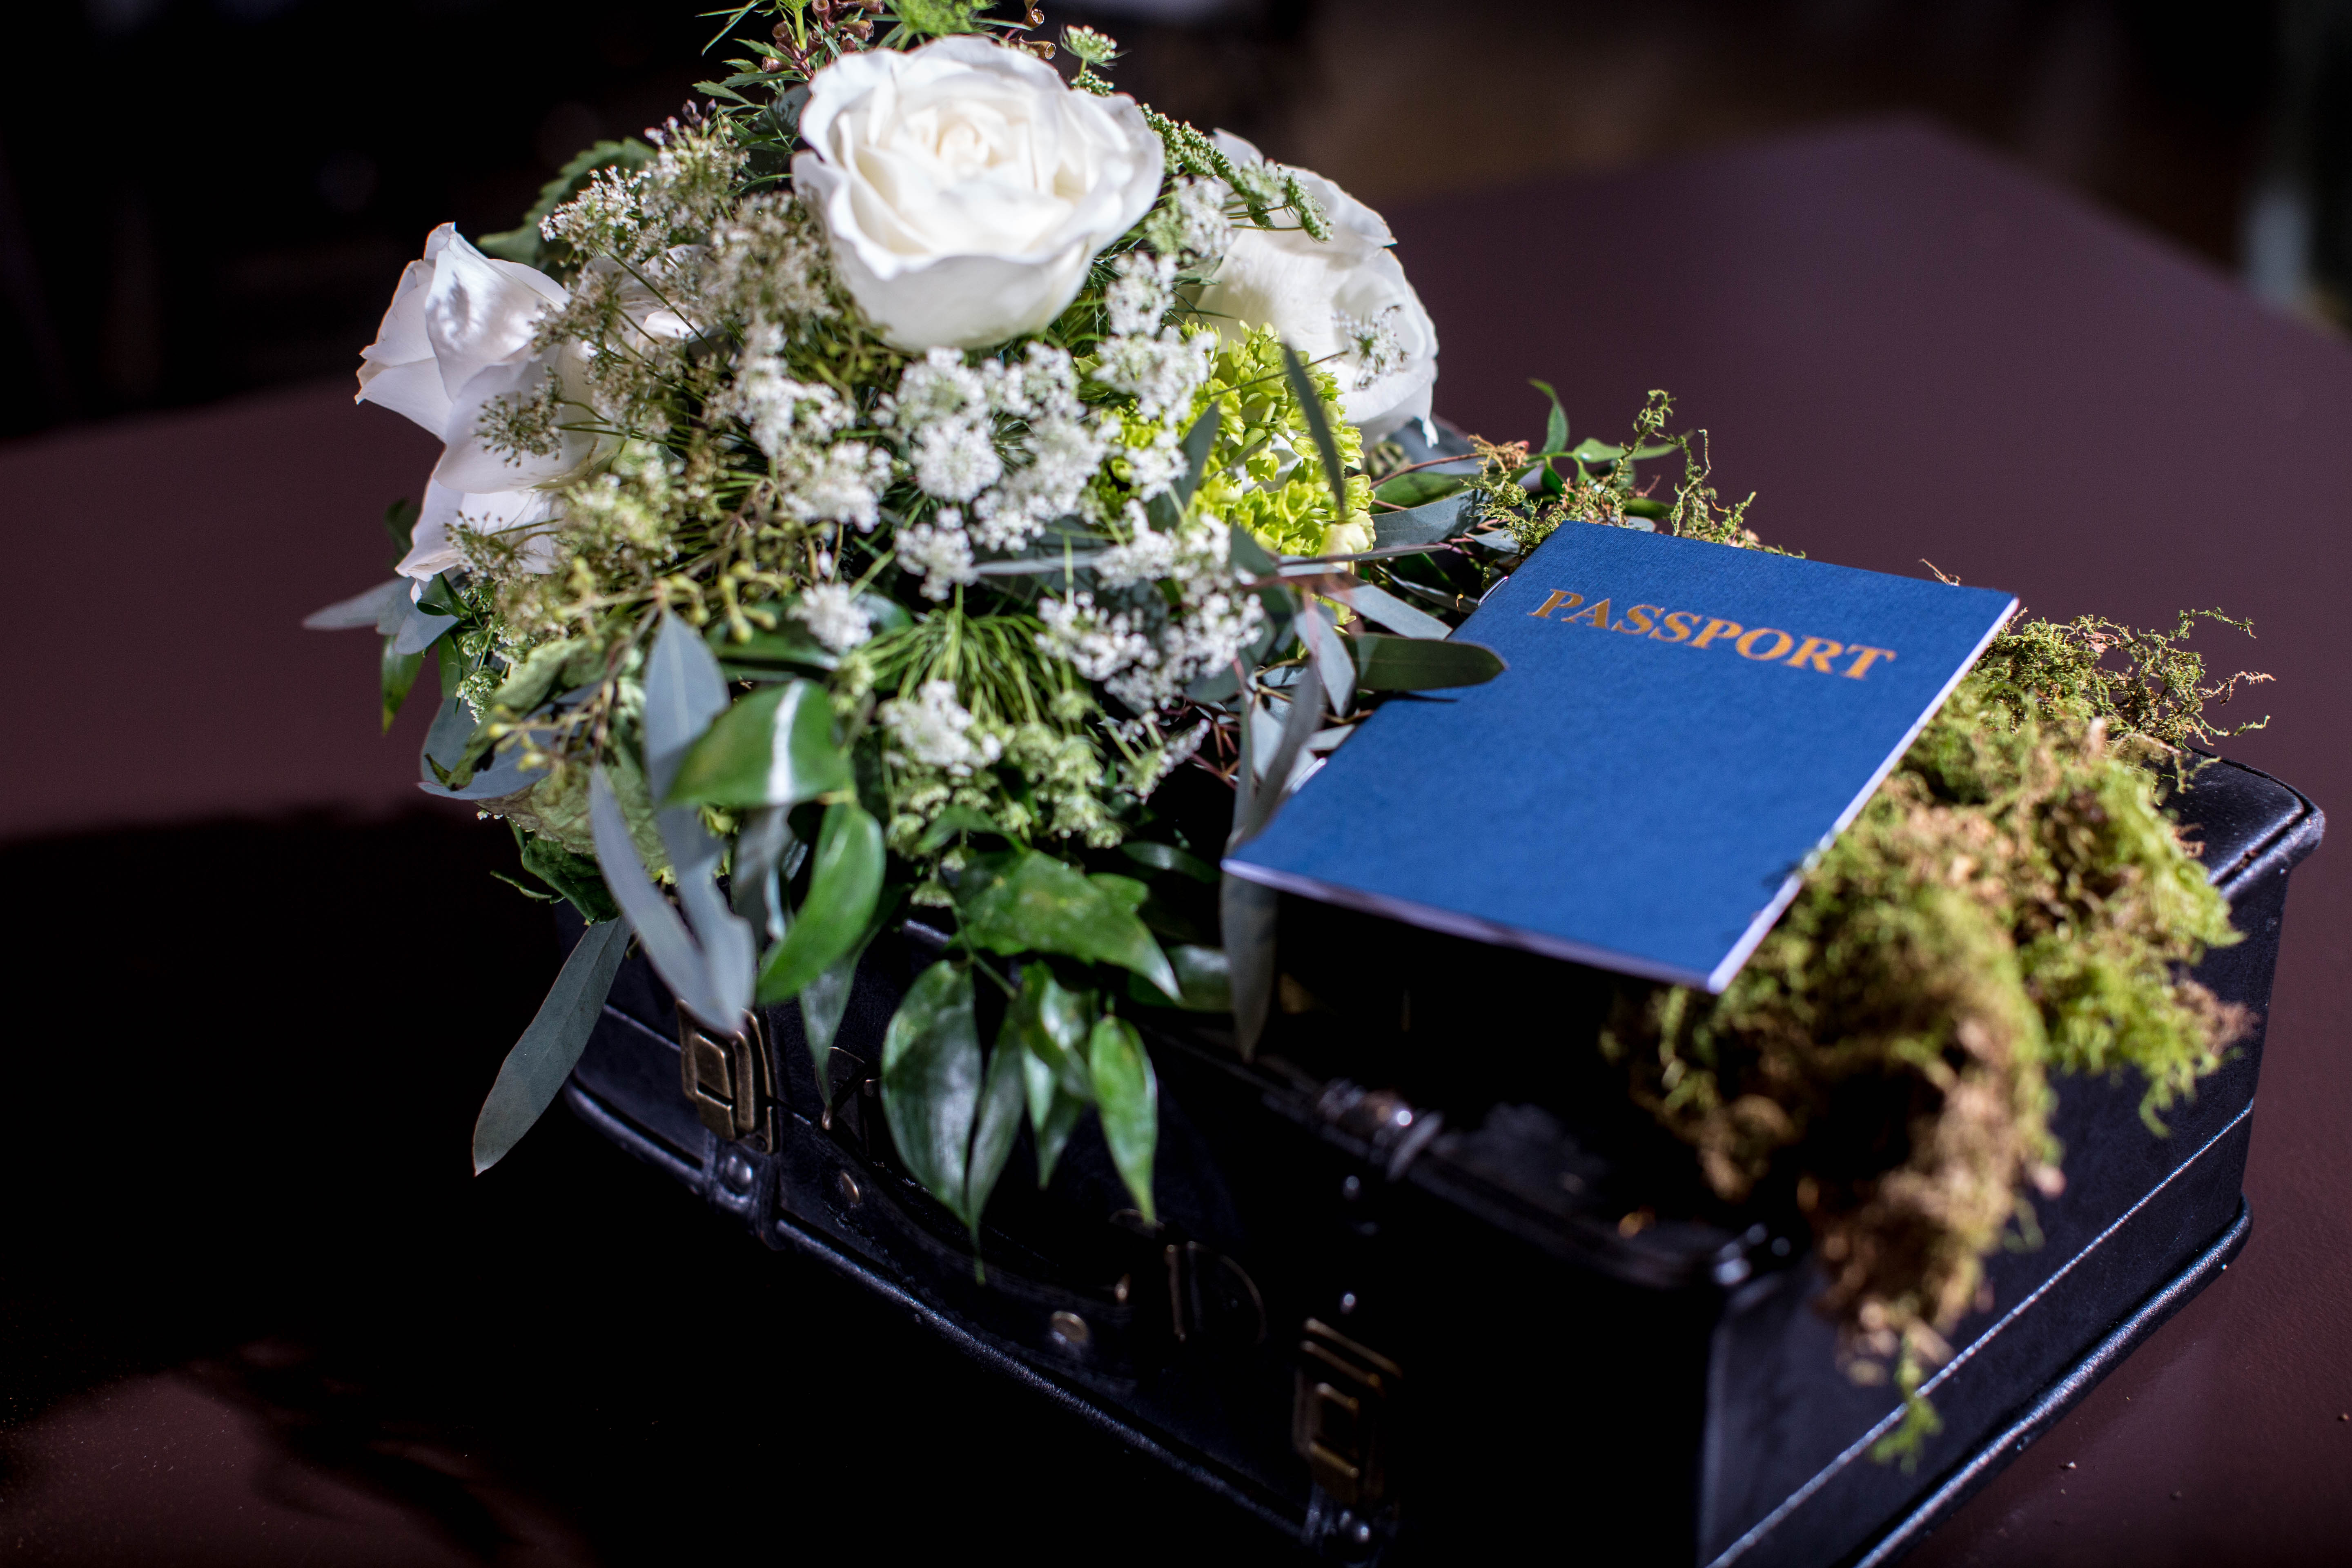 Vintage suitcases with flowers and passport centerpieces for Gabriela's global, vintage travel Bat Mitzvah party at VisArts in Rockville, Maryland | Pop Color Events | Adding a Pop of Color to Bar & Bat Mitzvahs in DC, MD & VA | Photo by Michael Temchine Photography